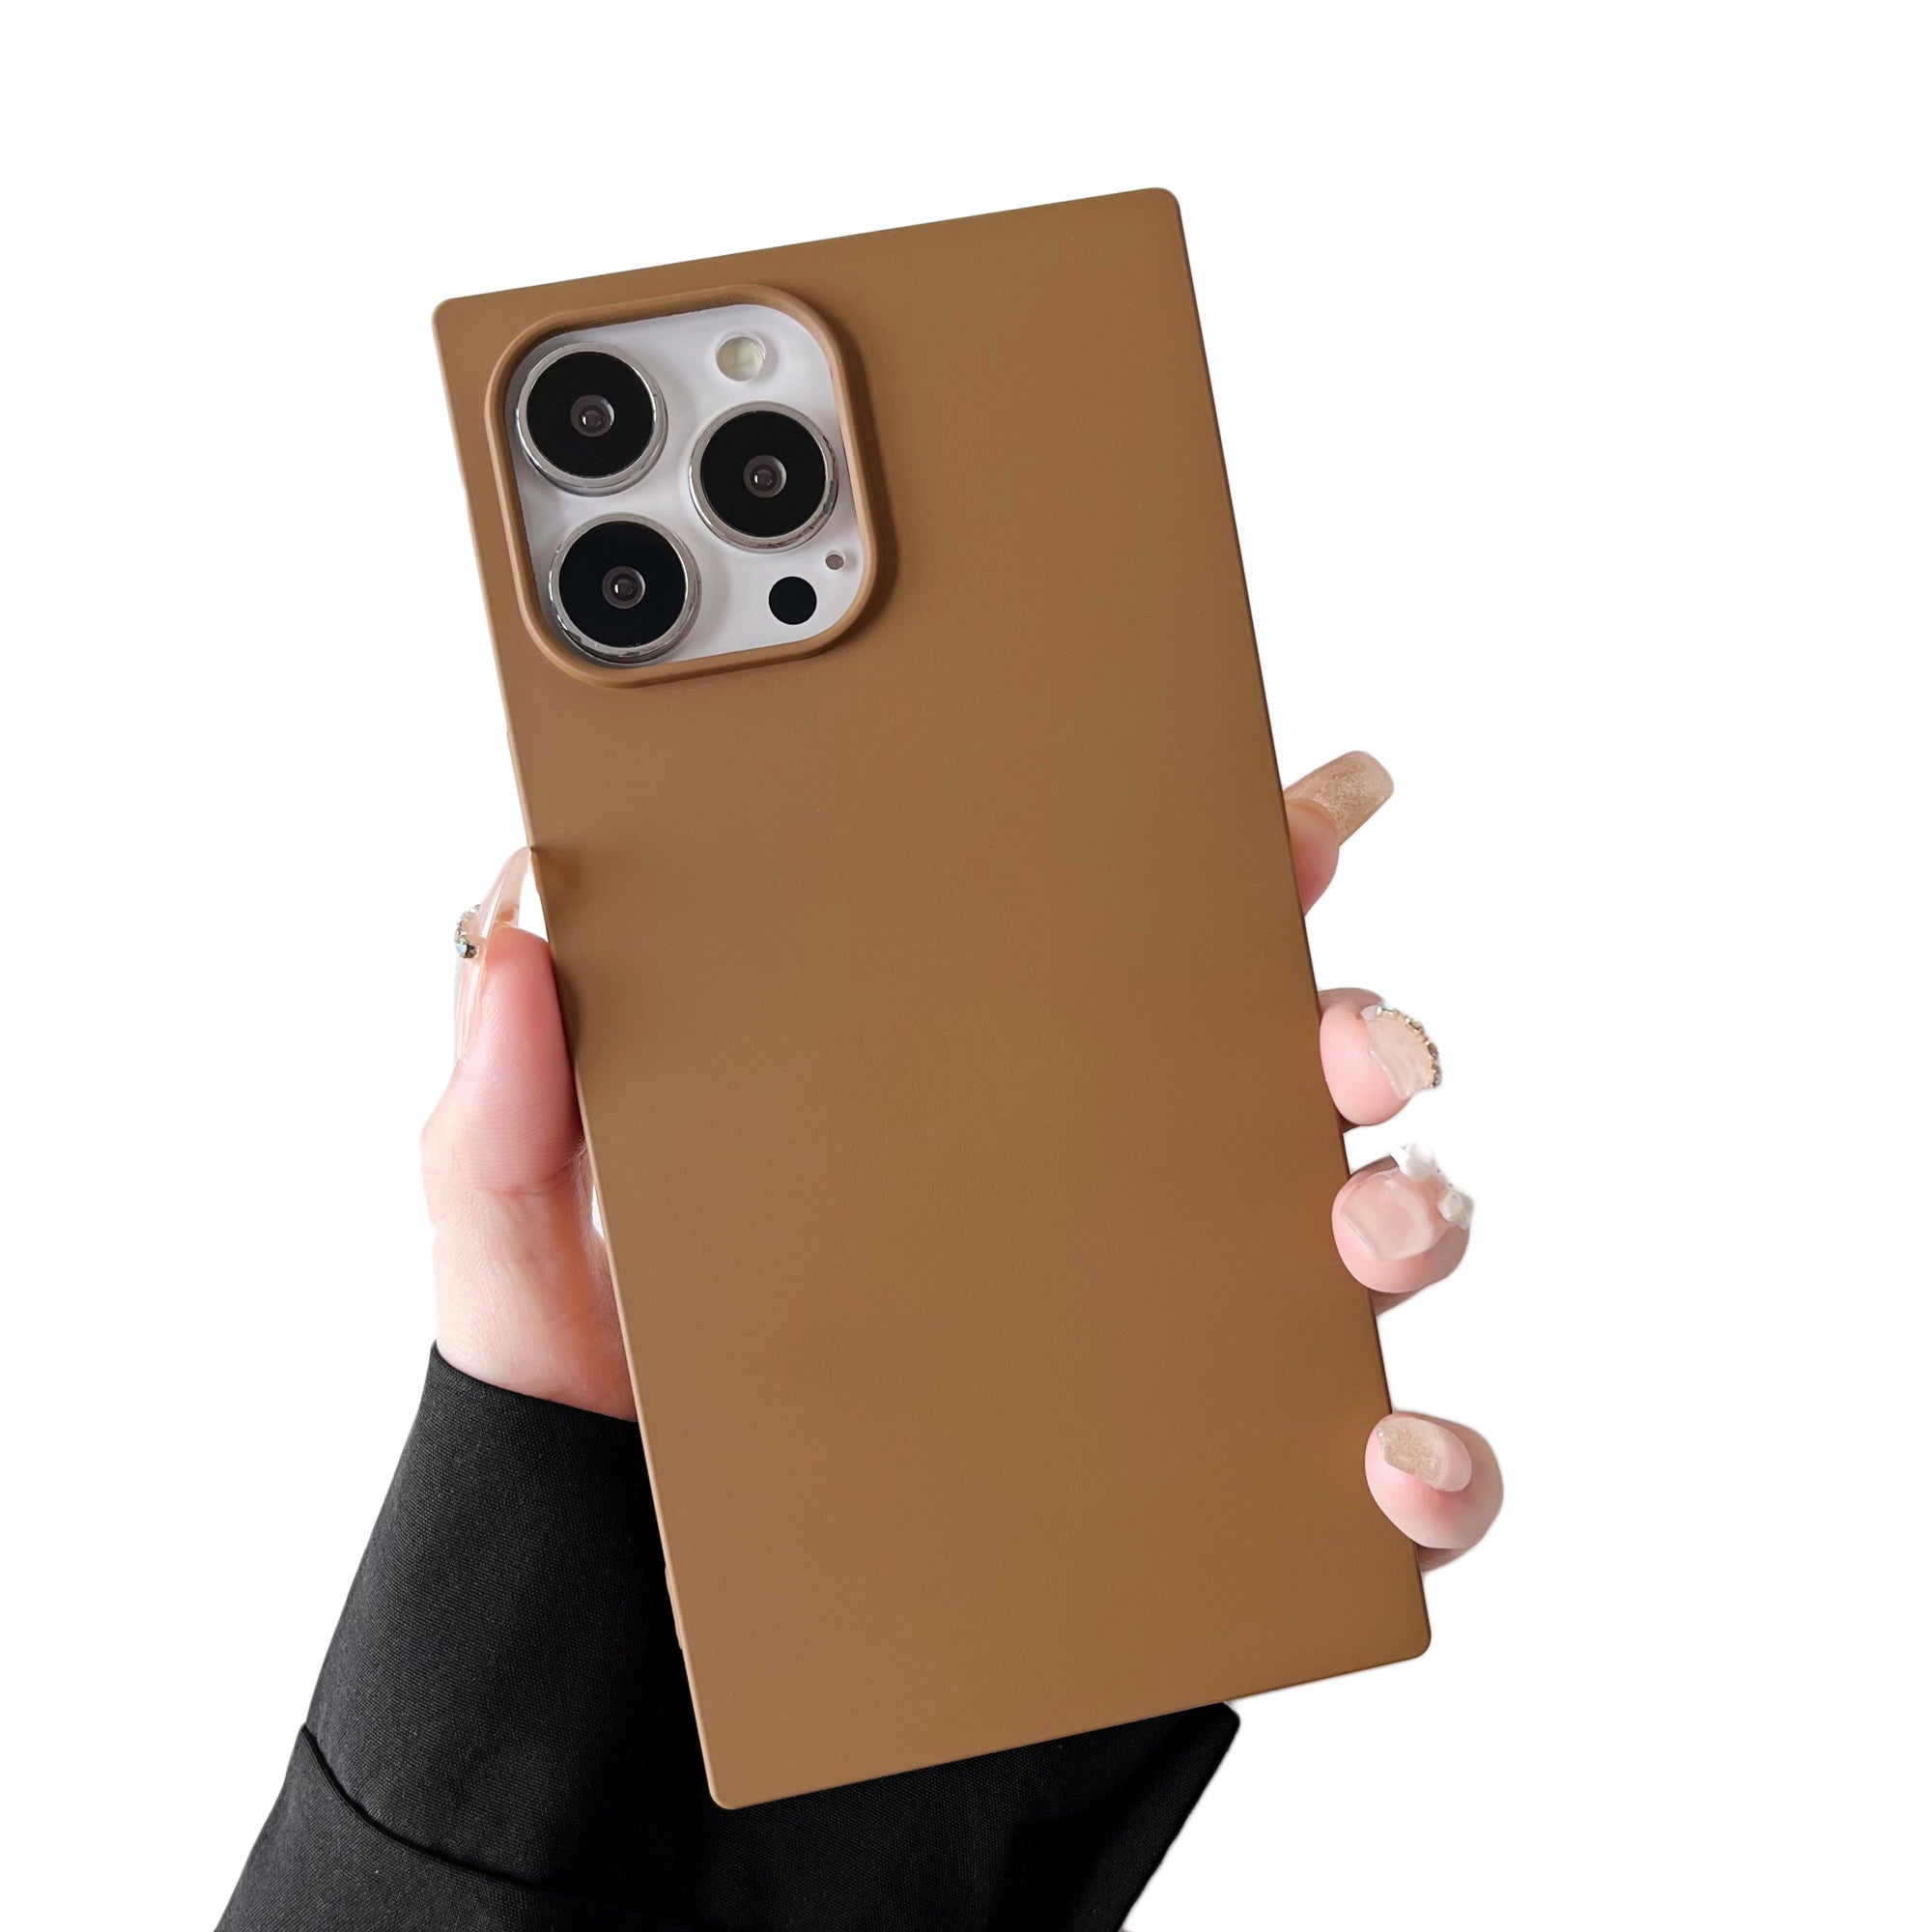 iPhone 11 Case Square Silicone Neutral Color (Golden Brown)